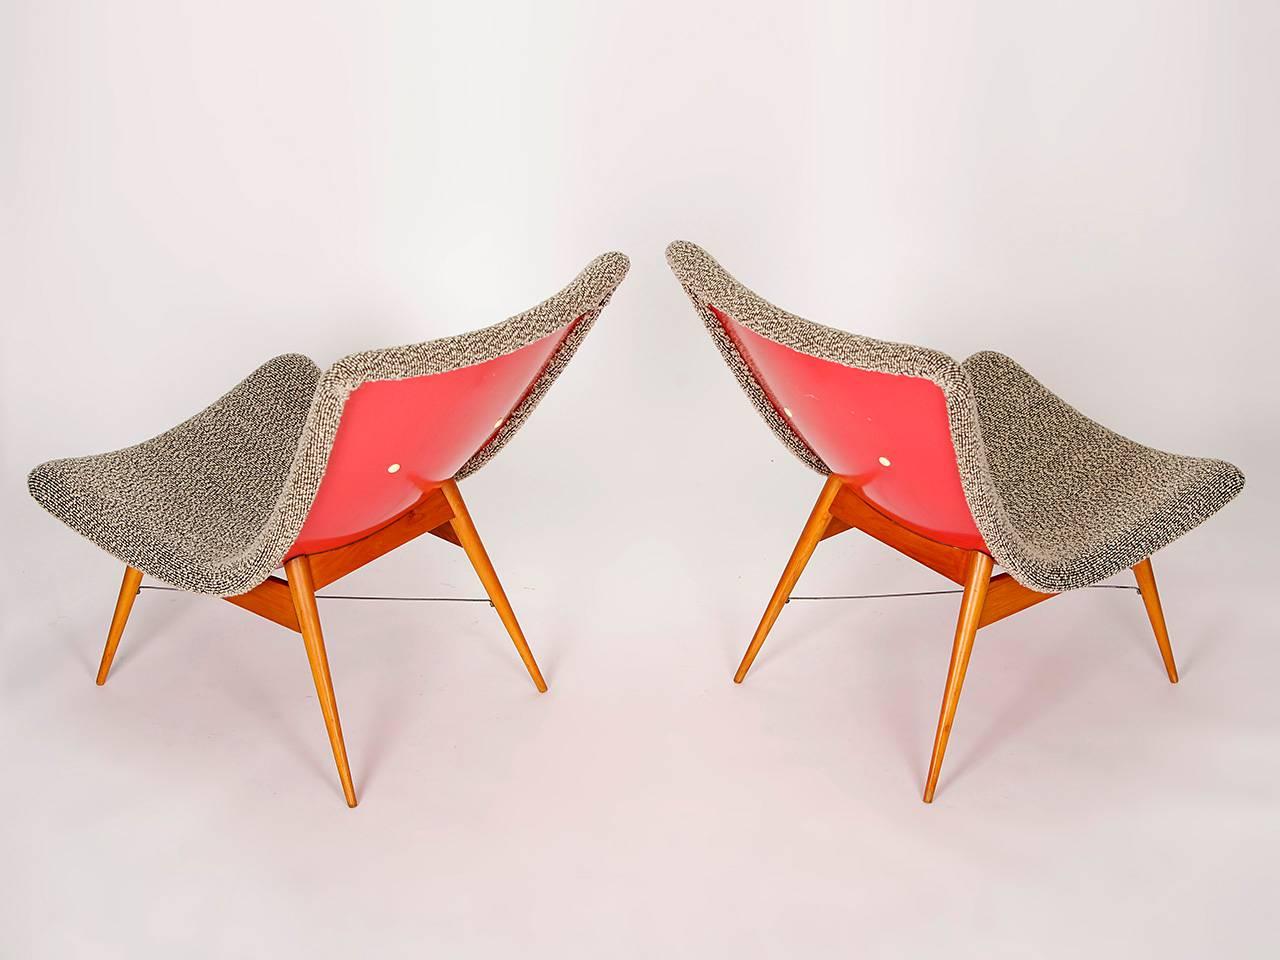 These two lounge chairs were designed in the 1960s by Miroslav Navratil for Cesky Nabytek in former Czechoslovakia. The shell seats are made of plastic laminate, the original fabric upholstery is made of sheep wool. The wooden feet have been